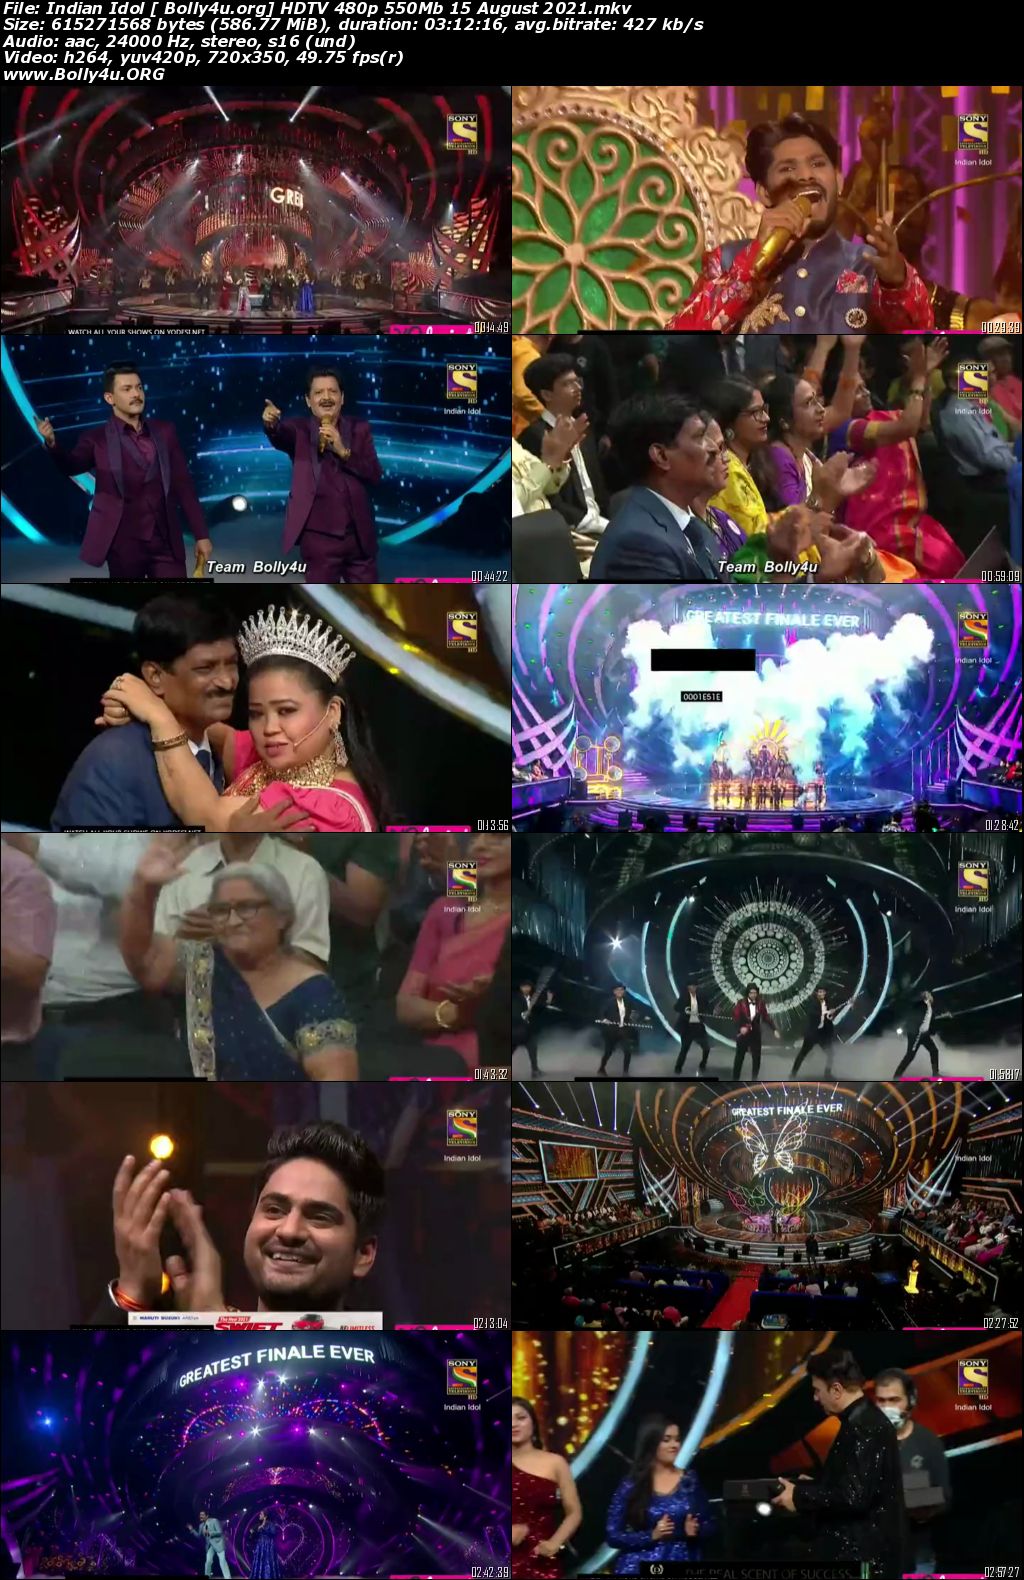 Indian Idol HDTV 480p 550Mb Grand Finale 15 August 2021 Download